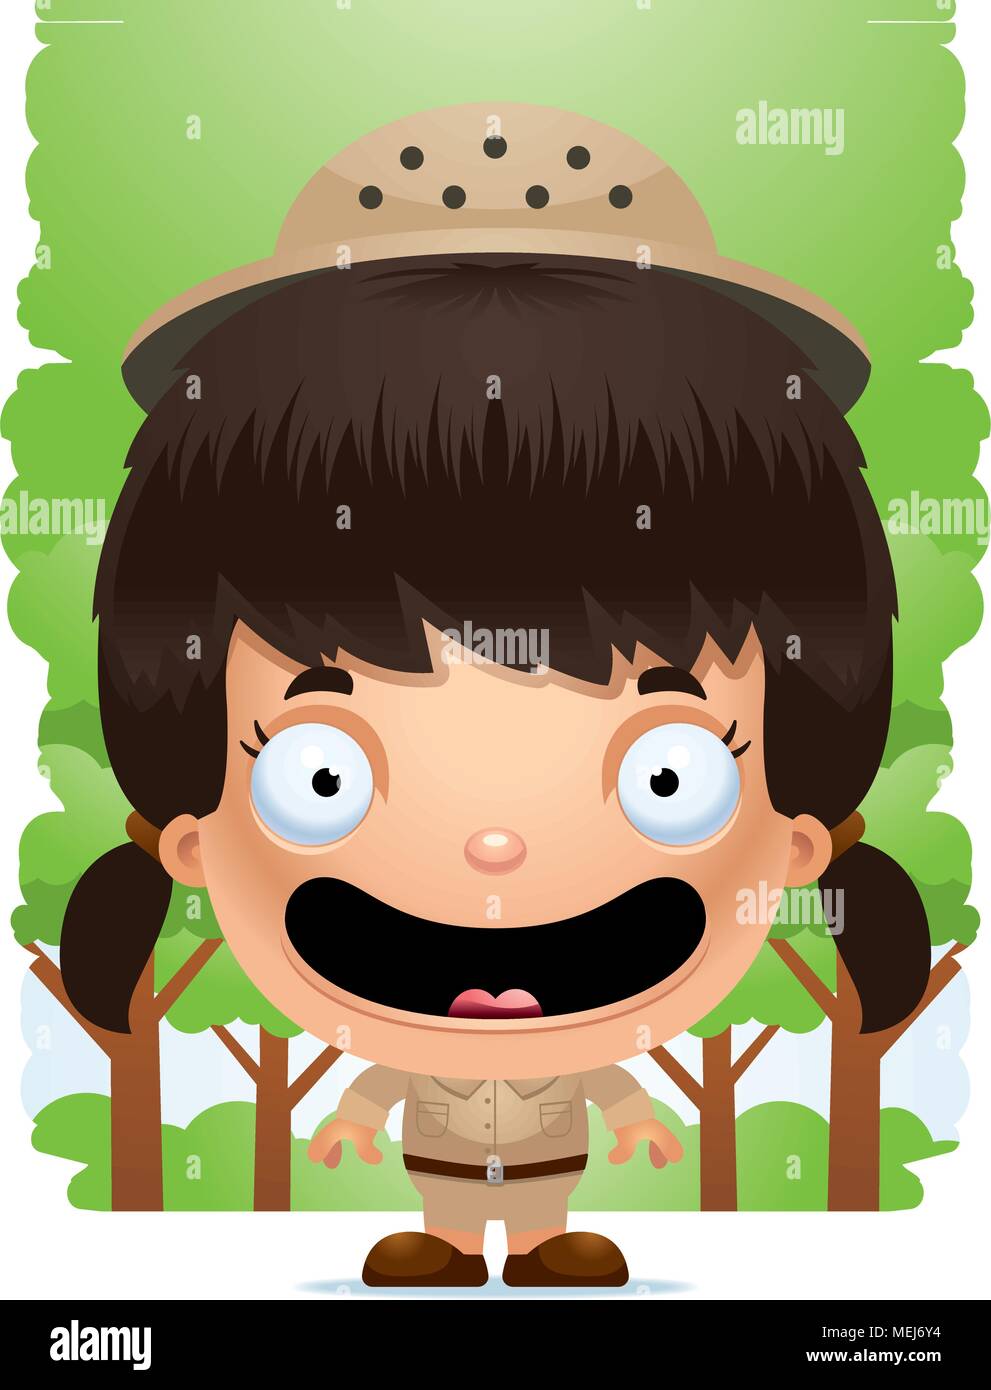 A cartoon illustration of a girl explorer standing and smiling. Stock Vector